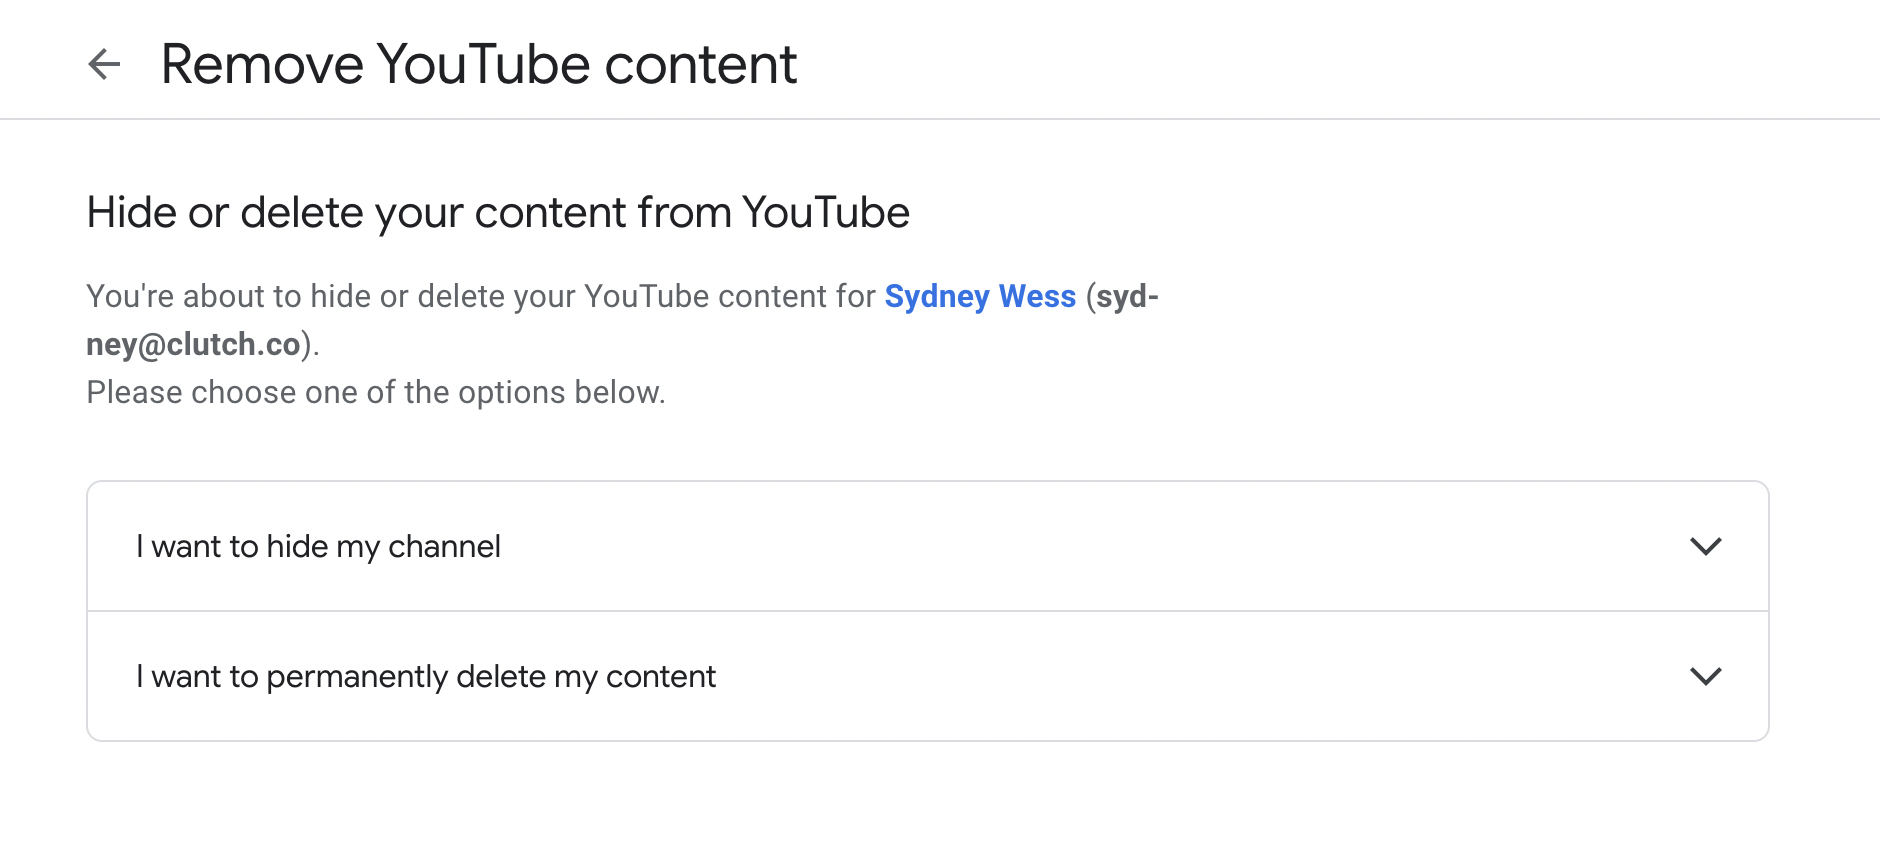 Two options to removing your YouTube content